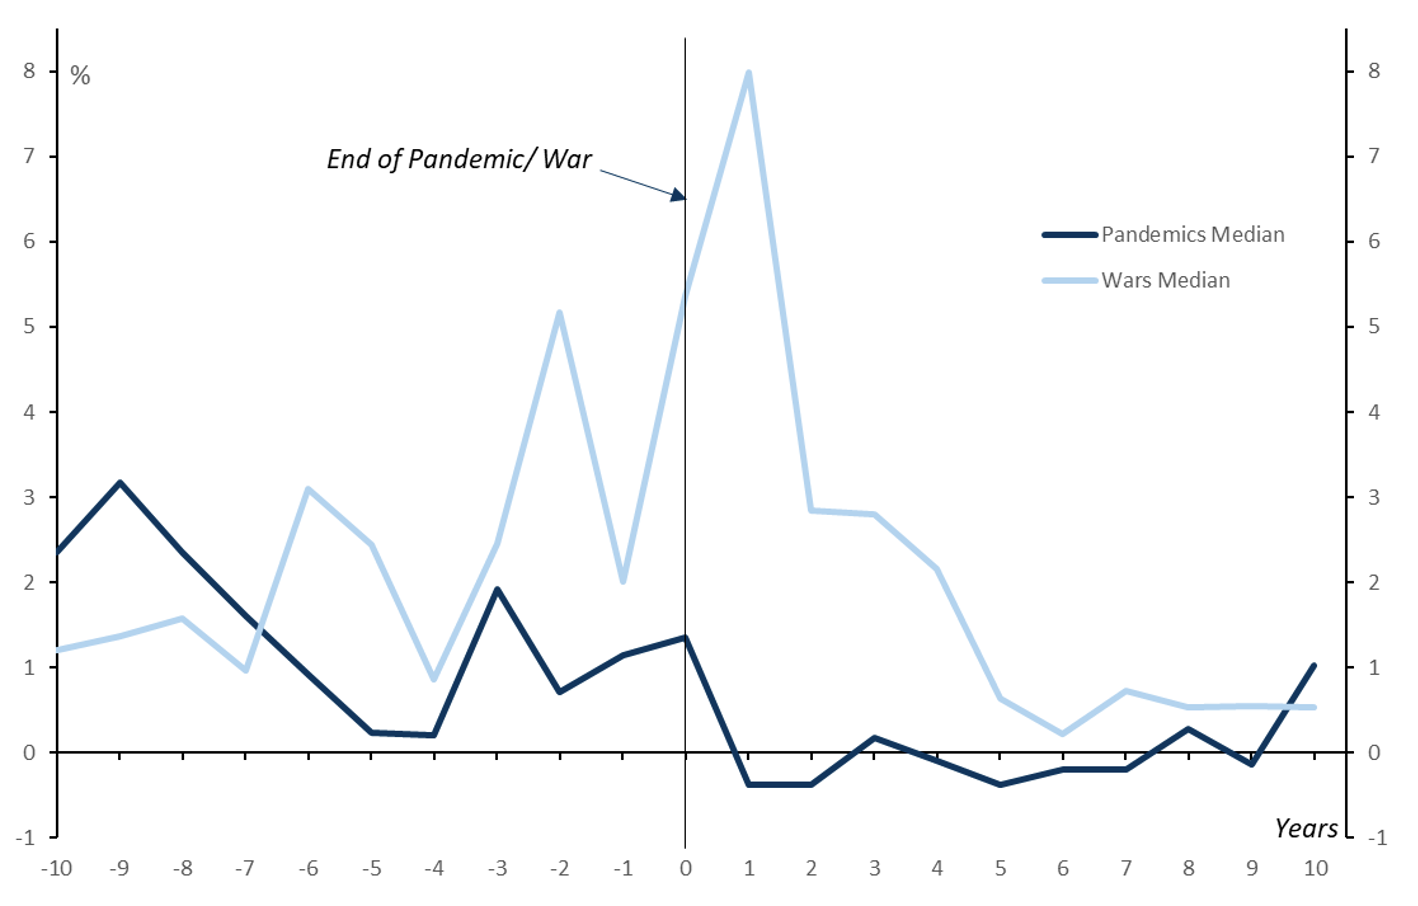 Figure 3. Inflation has Typically Risen Sharply Following Major Wars, But Not Following Pandemics